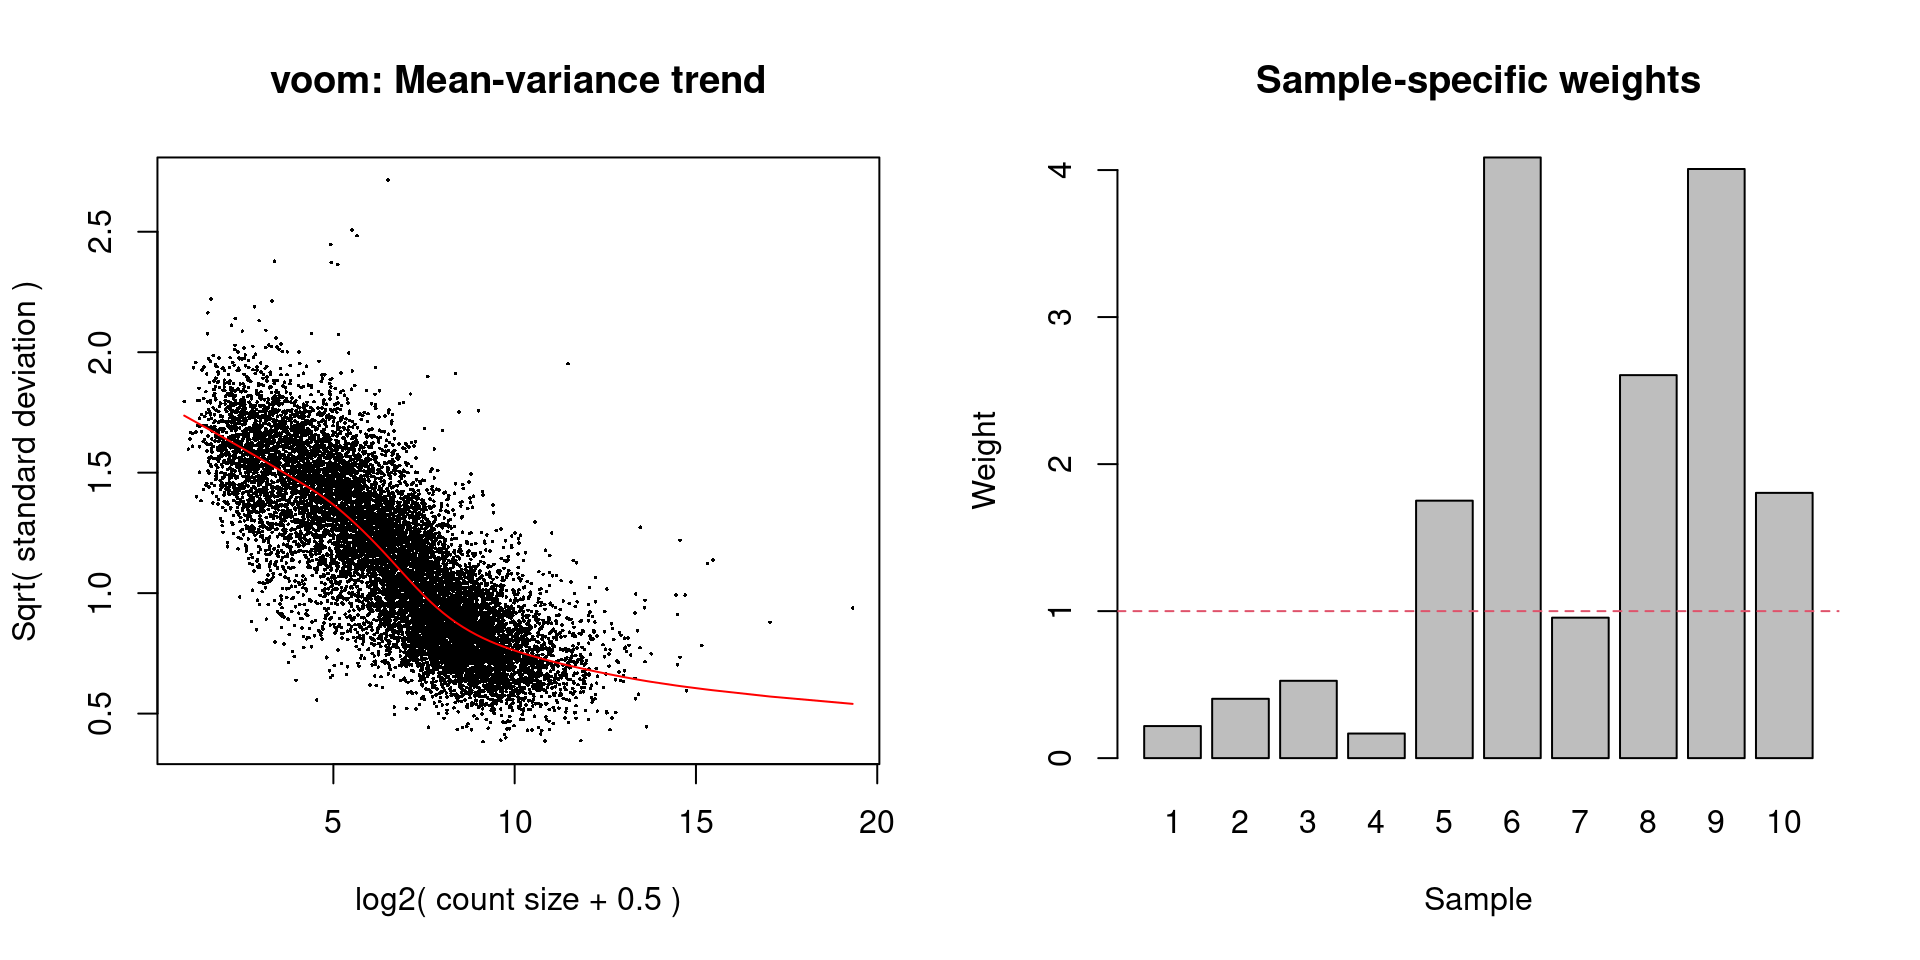 Diagnostic plots for `voom` after estimating observation and quality weights from the beta cell pseudo-bulk profiles. The left plot shows the mean-variance trend used to estimate the observation weights, while the right plot shows the per-sample quality weights.